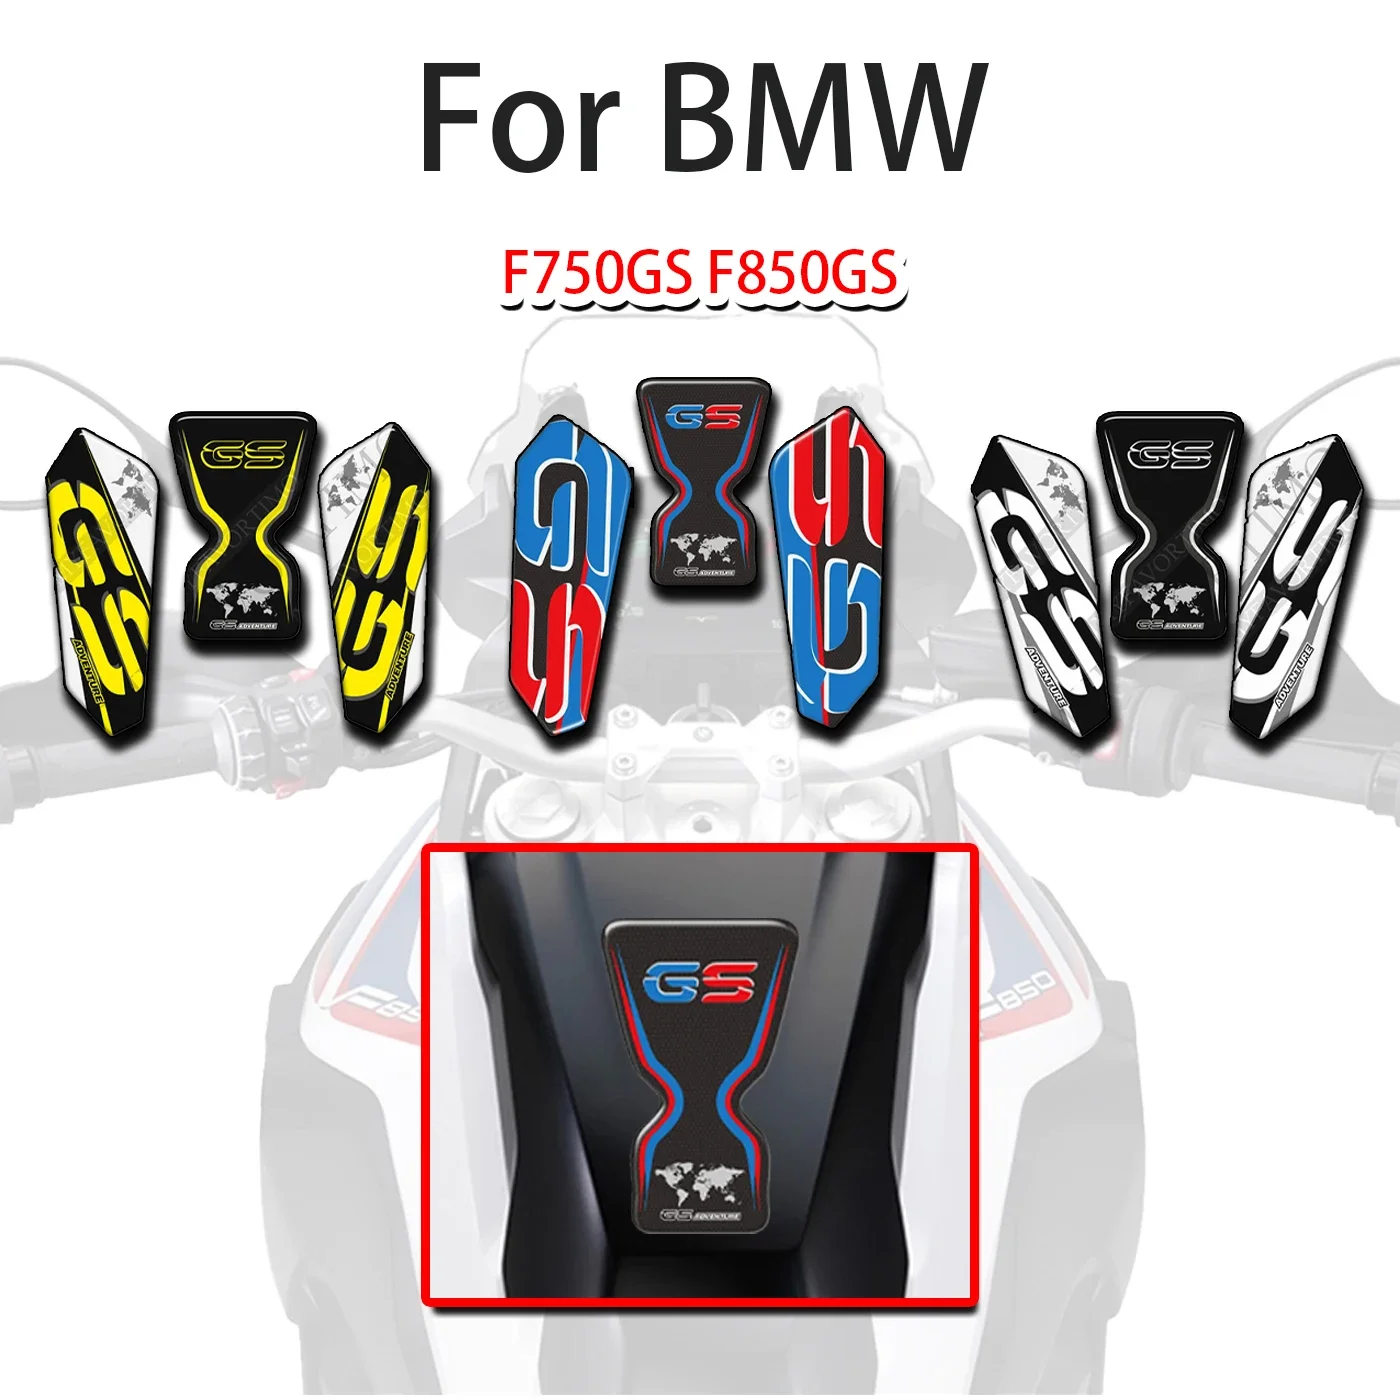 F750GS F850GS F750 GSA For BMW F750GS F850GS F750 GSA Tank Pad Decal Stickers Knee Protector Adventure 2018-2021